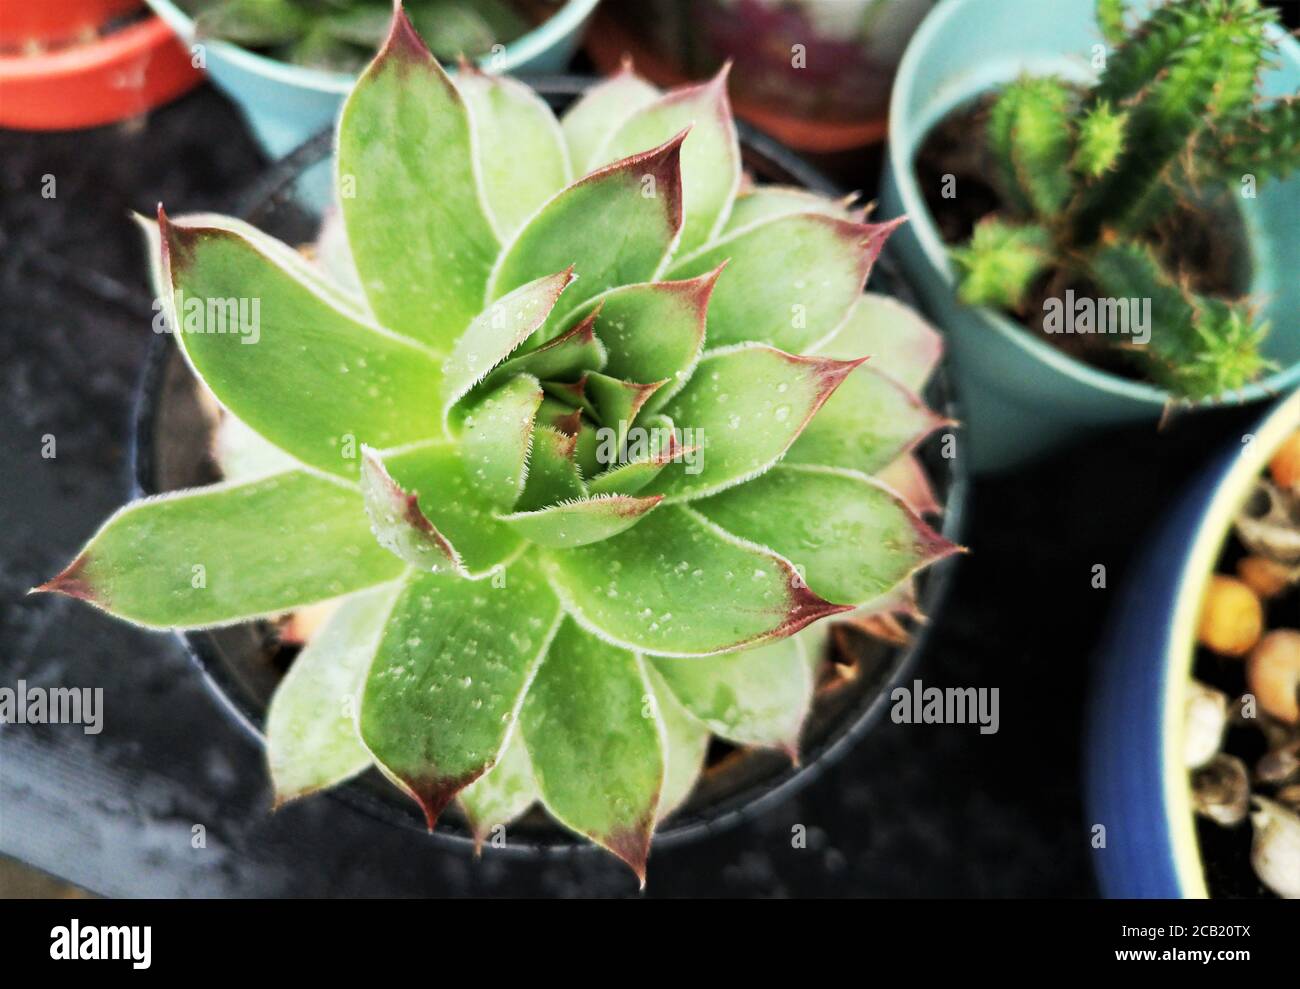 succulent close up of a home plant outdoor garden Stock Photo